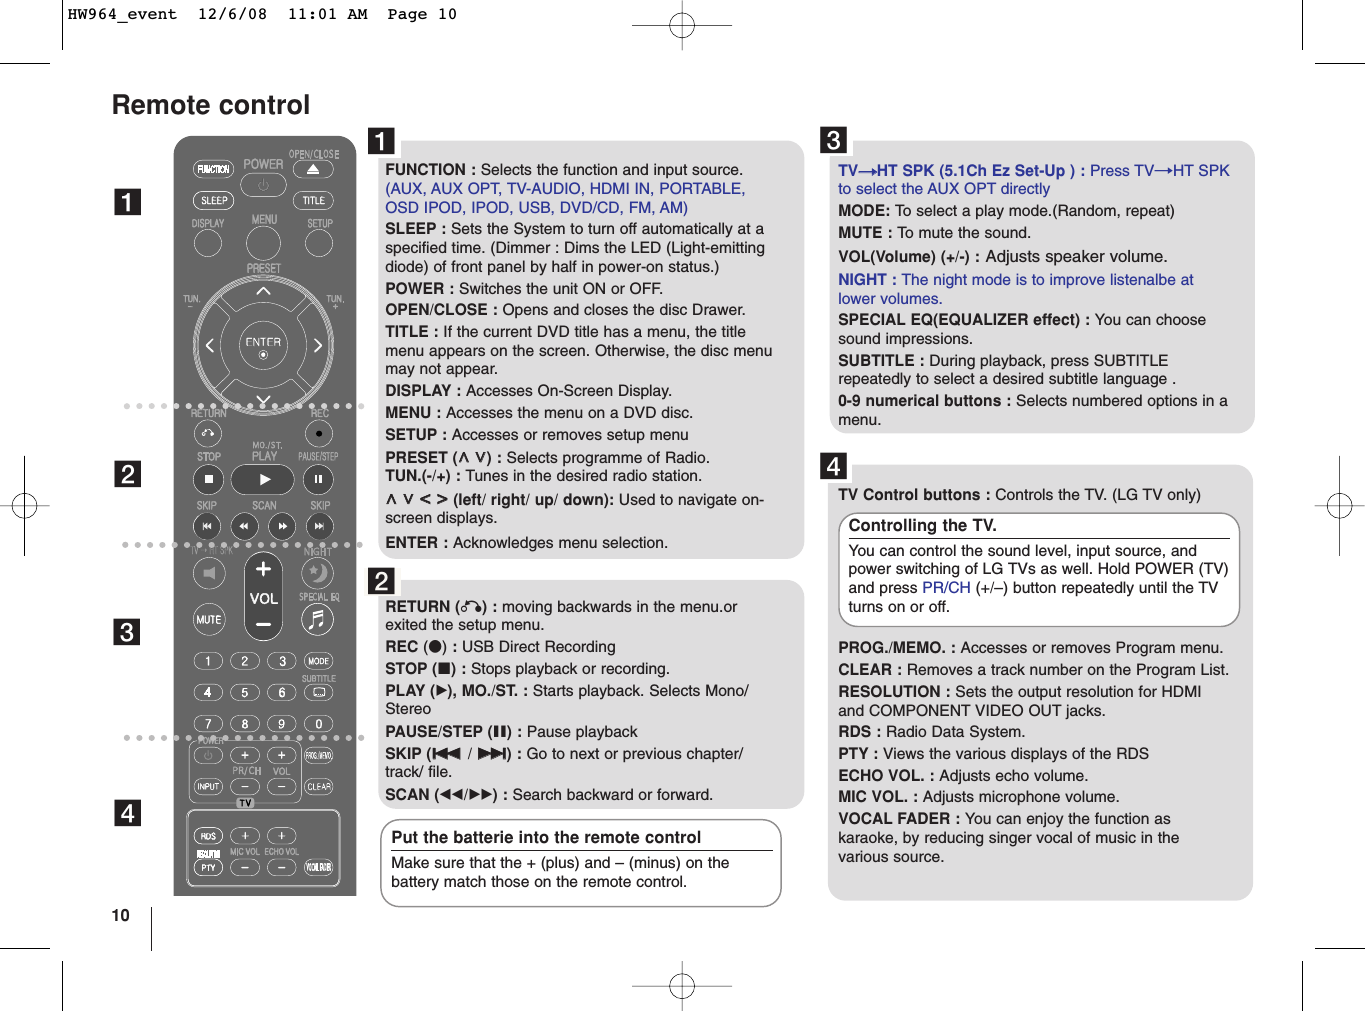 10Remote controlabcdFUNCTION : Selects the function and input source.(AUX, AUX OPT, TV-AUDIO, HDMI IN, PORTABLE,OSD IPOD, IPOD, USB, DVD/CD, FM, AM)SLEEP : Sets the System to turn off automatically at aspecified time. (Dimmer : Dims the LED (Light-emittingdiode) of front panel by half in power-on status.)POWER : Switches the unit ON or OFF.OPEN/CLOSE : Opens and closes the disc Drawer.TITLE : If the current DVD title has a menu, the titlemenu appears on the screen. Otherwise, the disc menumay not appear.DISPLAY : Accesses On-Screen Display.MENU : Accesses the menu on a DVD disc.SETUP : Accesses or removes setup menu PRESET (UU  uu) : Selects programme of Radio.TUN.(-/+) : Tunes in the desired radio station.UU  uu  II  ii(left/ right/ up/ down): Used to navigate on-screen displays.ENTER : Acknowledges menu selection.RETURN (O) : moving backwards in the menu.orexited the setup menu.REC (z): USB Direct RecordingSTOP (x) : Stops playback or recording.PLAY (B), MO./ST. : Starts playback. Selects Mono/StereoPAUSE/STEP (X) : Pause playback SKIP (../ &gt;&gt;) : Go to next or previous chapter/track/ file. SCAN (bb/BB) : Search backward or forward.TVttHT SPK (5.1Ch Ez Set-Up ) : Press TVtHT SPKto select the AUX OPT directly MODE: To  select a play mode.(Random, repeat)MUTE : To  mute the sound.VOL(Volume) (+/-) : Adjusts speaker volume.NIGHT : The night mode is to improve listenalbe atlower volumes.SPECIAL EQ(EQUALIZER effect) : You can choosesound impressions.SUBTITLE : During playback, press SUBTITLErepeatedly to select a desired subtitle language .0-9 numerical buttons : Selects numbered options in amenu.TV Control buttons : Controls the TV. (LG TV only)PROG./MEMO. : Accesses or removes Program menu.CLEAR : Removes a track number on the Program List.RESOLUTION : Sets the output resolution for HDMIand COMPONENT VIDEO OUT jacks.RDS : Radio Data System.PTY : Views the various displays of the RDS ECHO VOL. : Adjusts echo volume.MIC VOL. : Adjusts microphone volume.VOCAL FADER : You can enjoy the function askaraoke, by reducing singer vocal of music in thevarious source. Controlling the TV.You can control the sound level, input source, andpower switching of LG TVs as well. Hold POWER (TV)and press PR/CH (+/–) button repeatedly until the TVturns on or off.Put the batterie into the remote controlMake sure that the + (plus) and – (minus) on thebattery match those on the remote control.abcdHW964_event  12/6/08  11:01 AM  Page 10